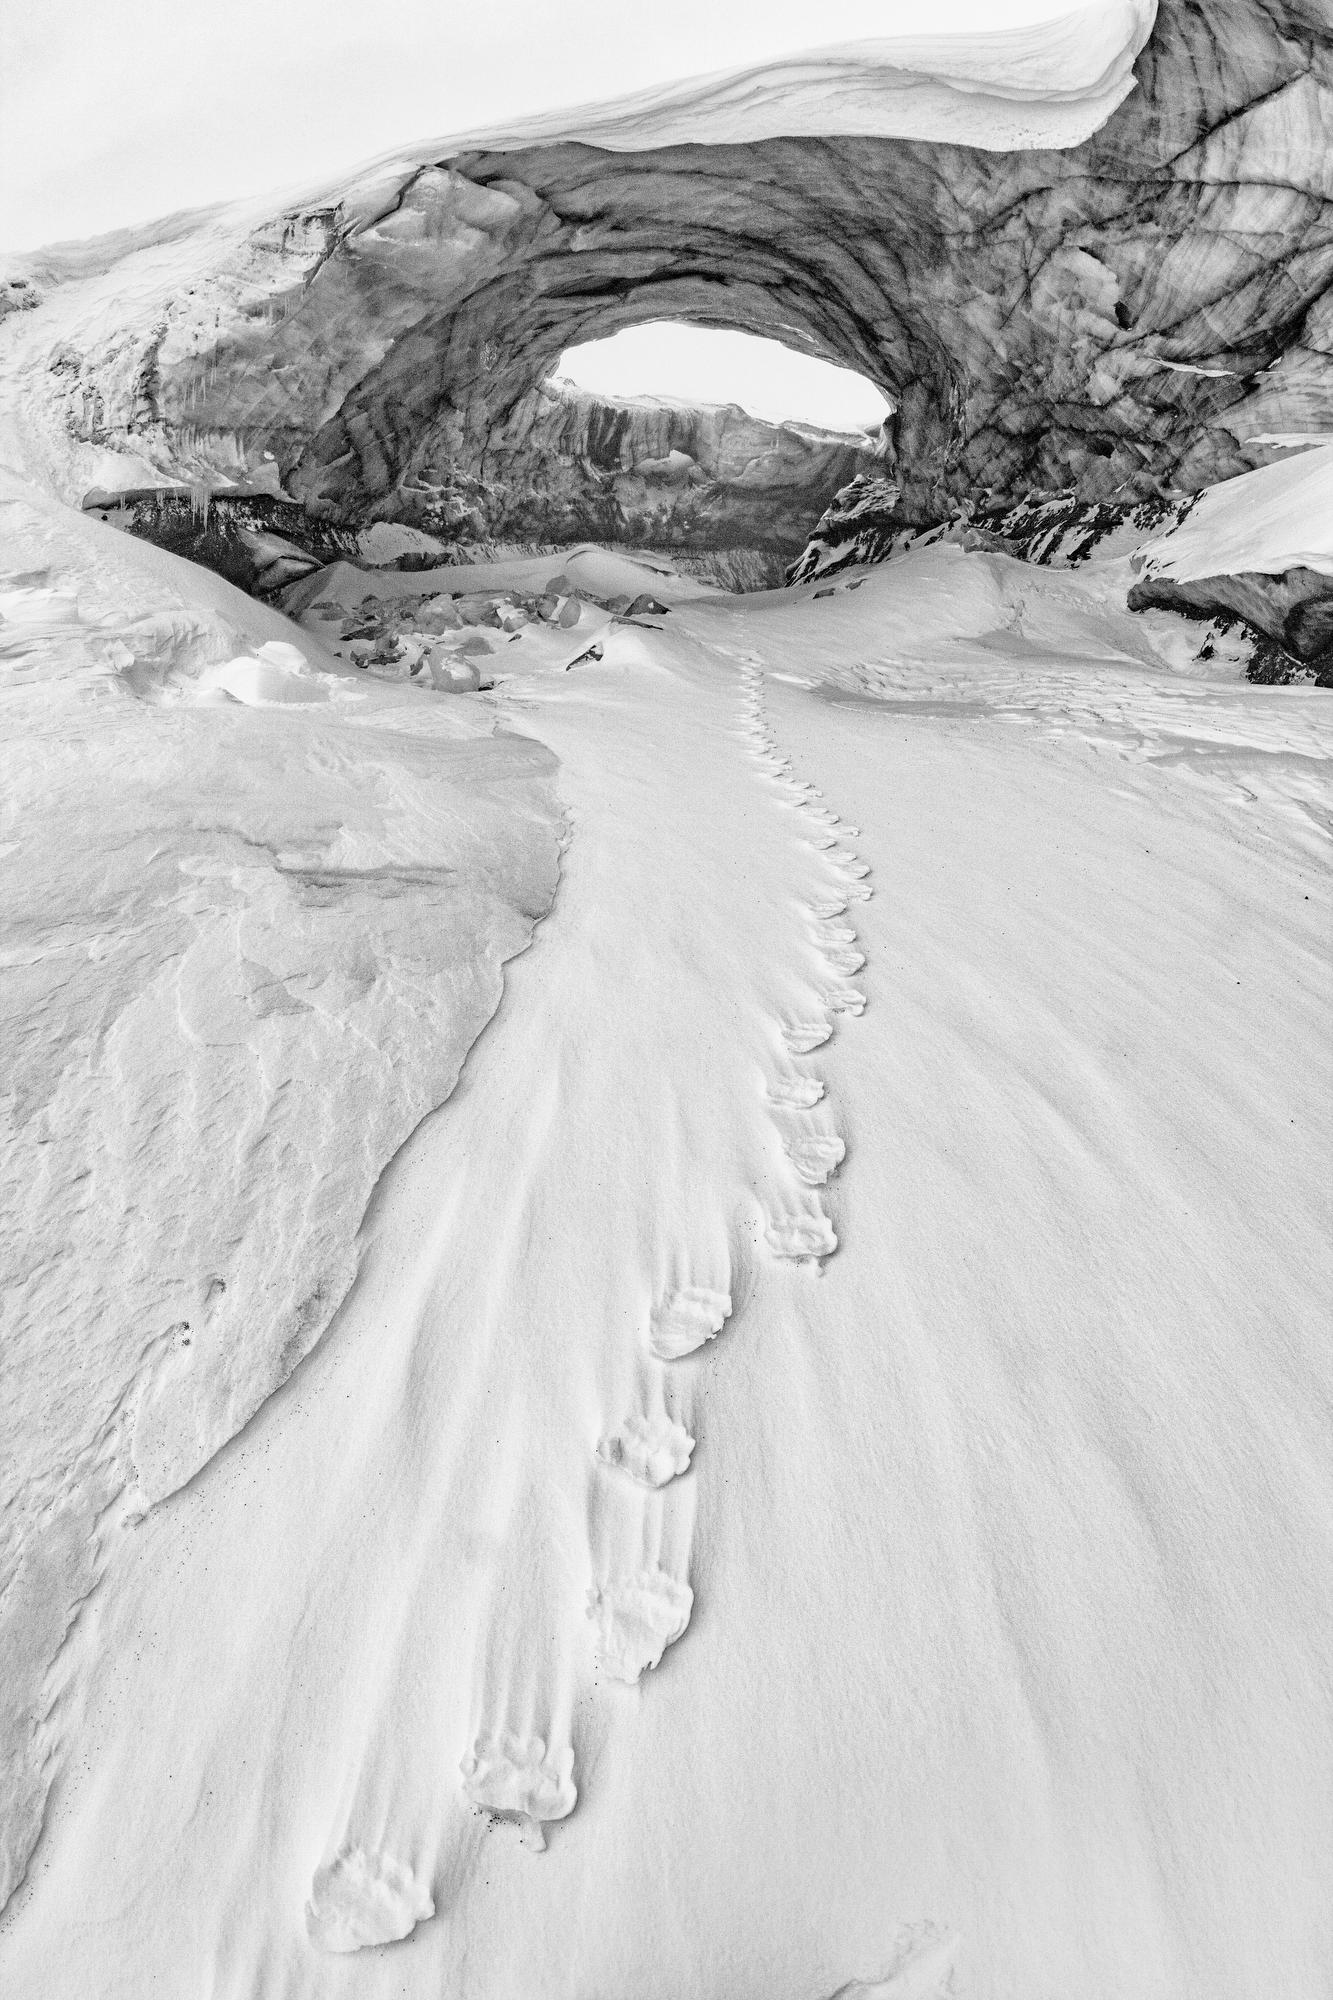 Black and White Photograph Paul Nicklen - Lair d'ours